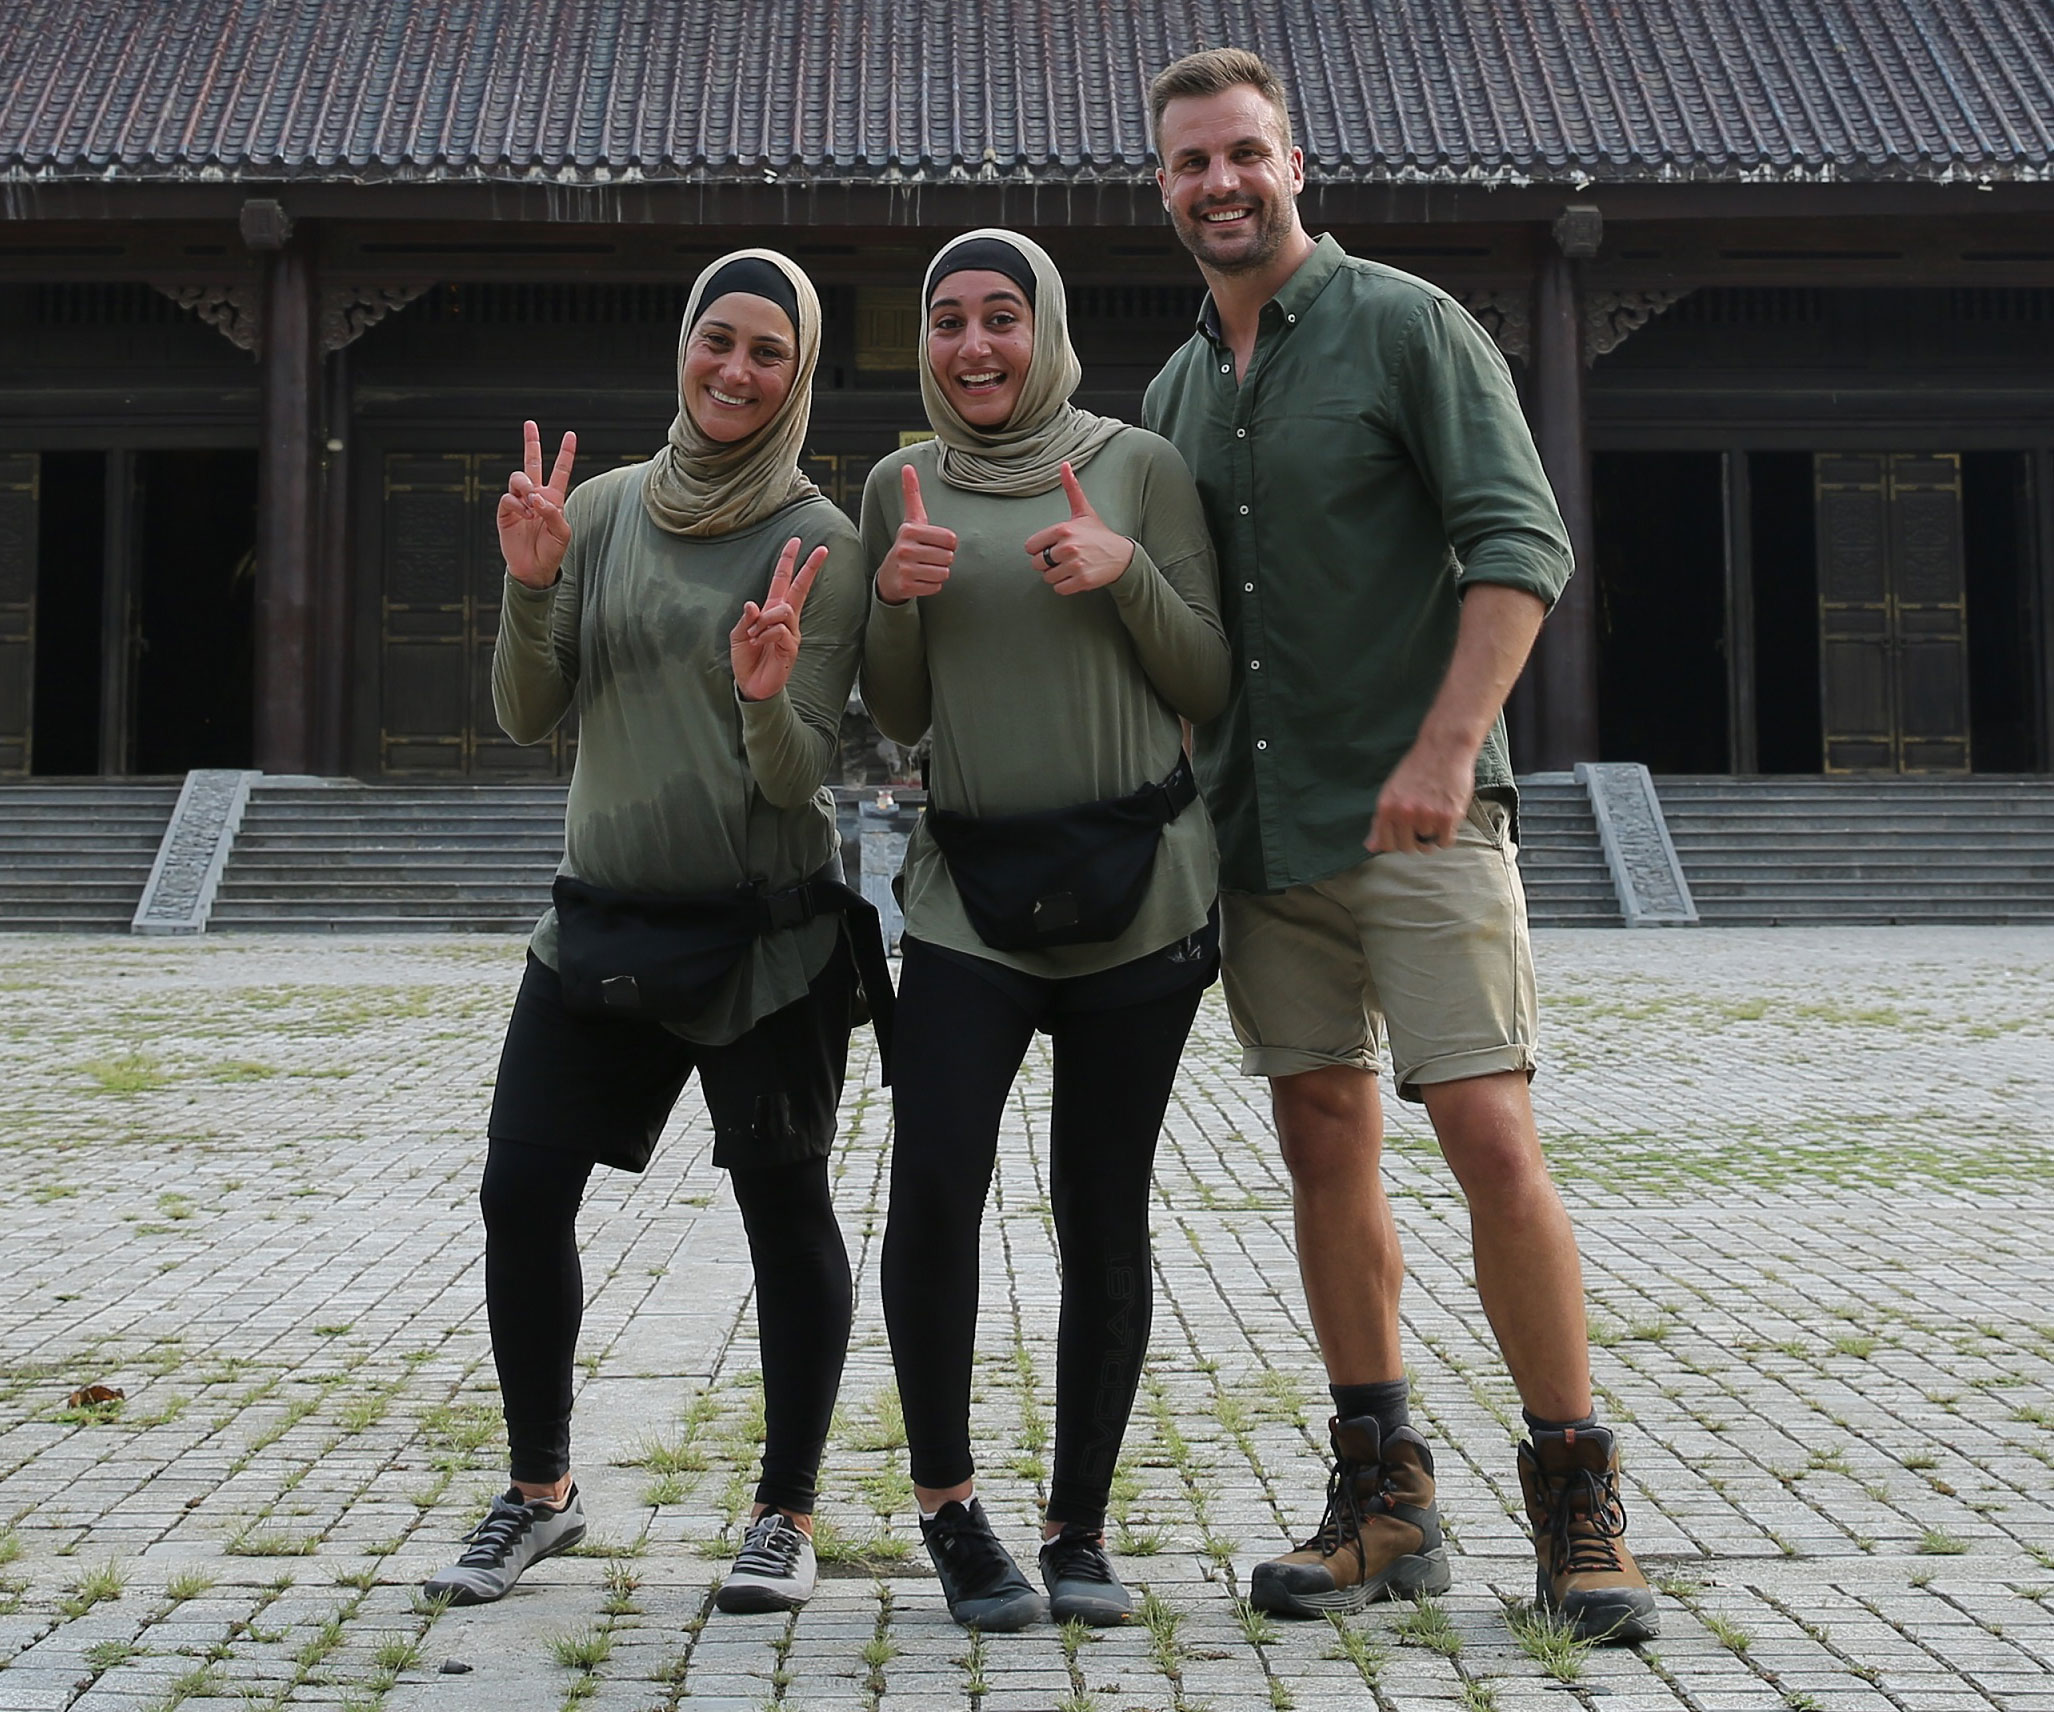 “As Muslim women, we can do anything!” Rowah and Amani are overwhelmed by the support from Amazing Race fans